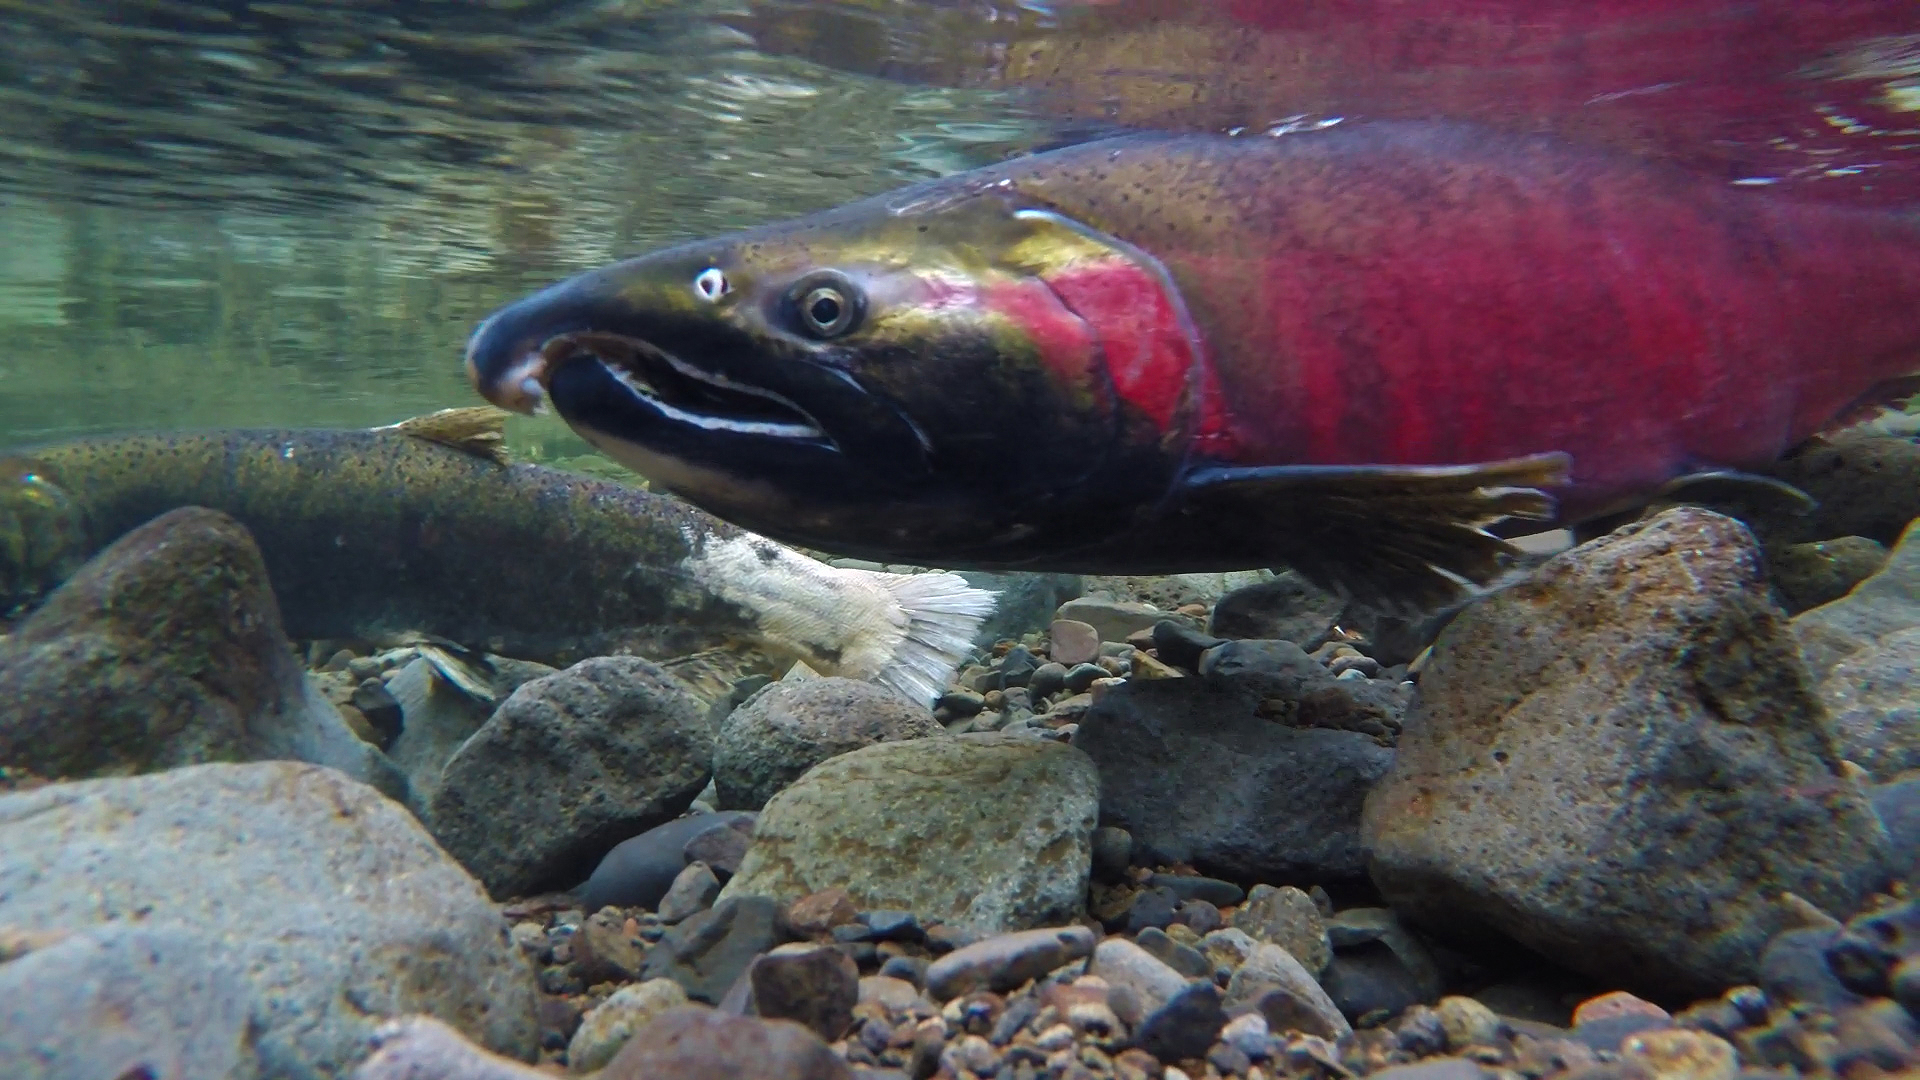 The photo is of a red salmon underwater. The fish is swimming in a shallow river above small rocks on the riverbed.